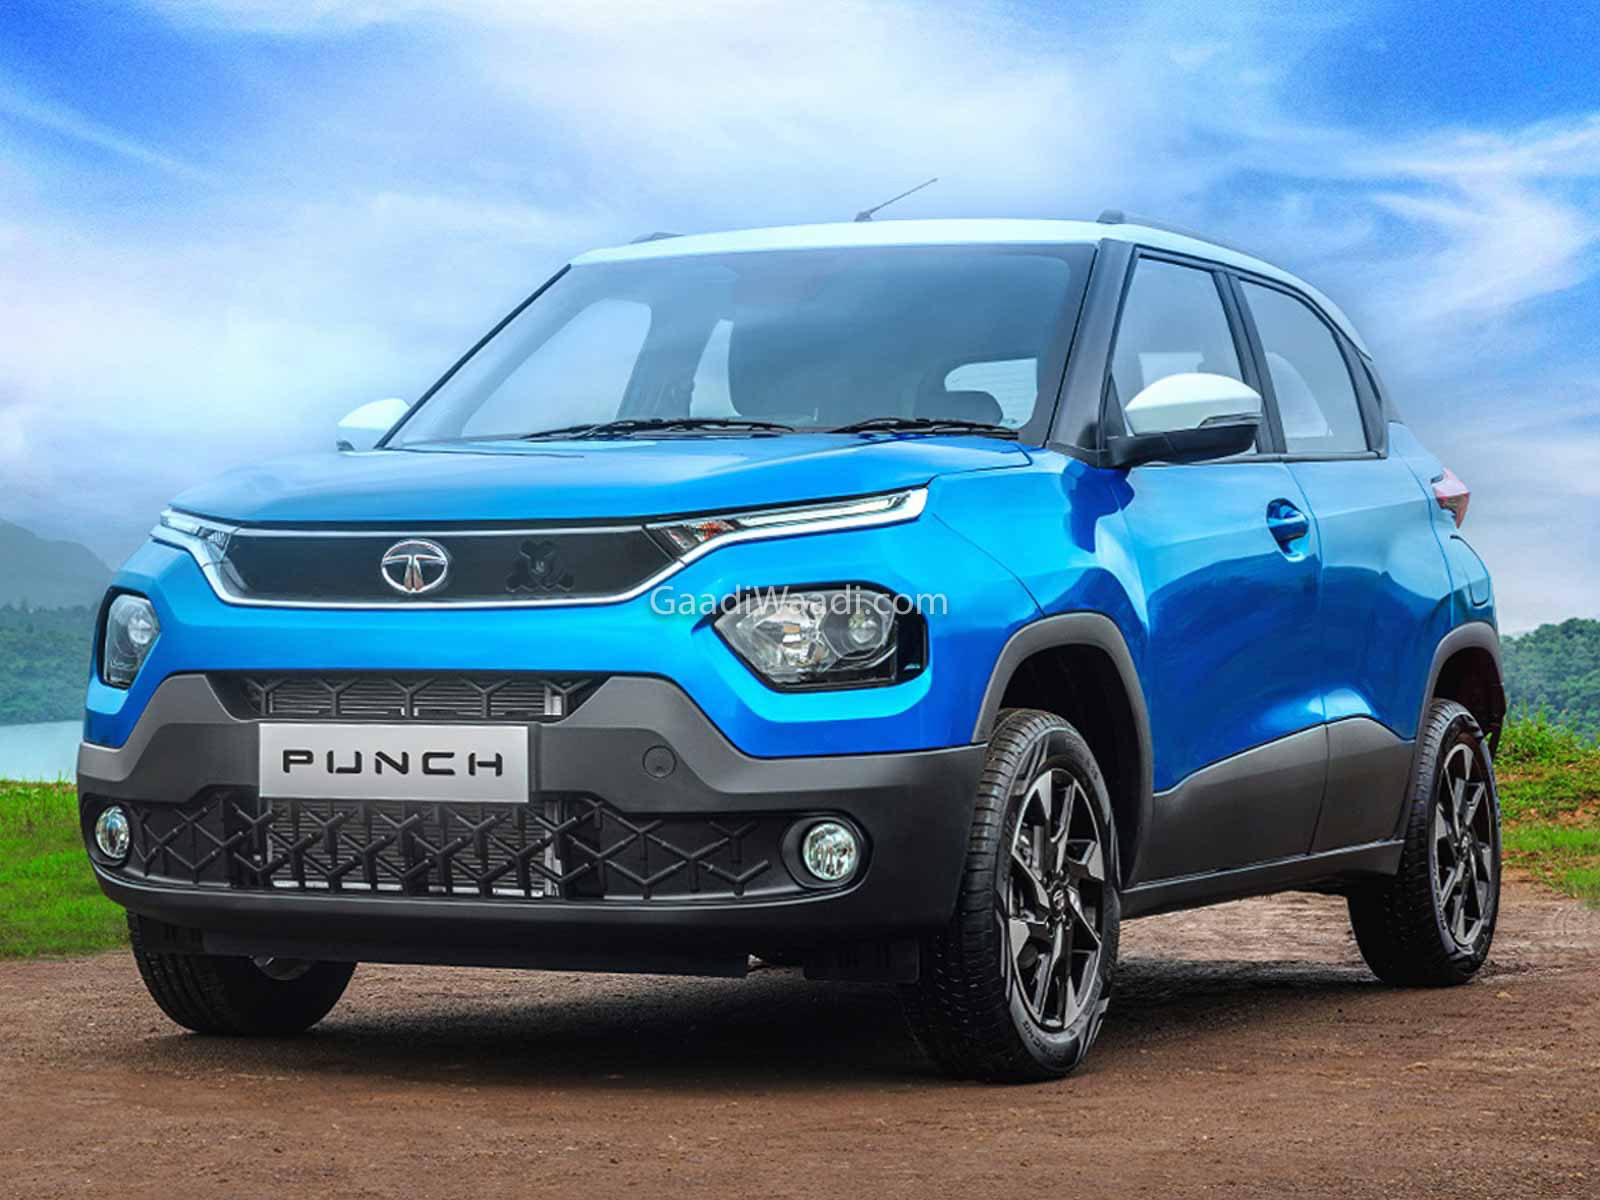 Tata Punch Variants & Colour Details Leaked Ahead Of Unveil On Oct 4